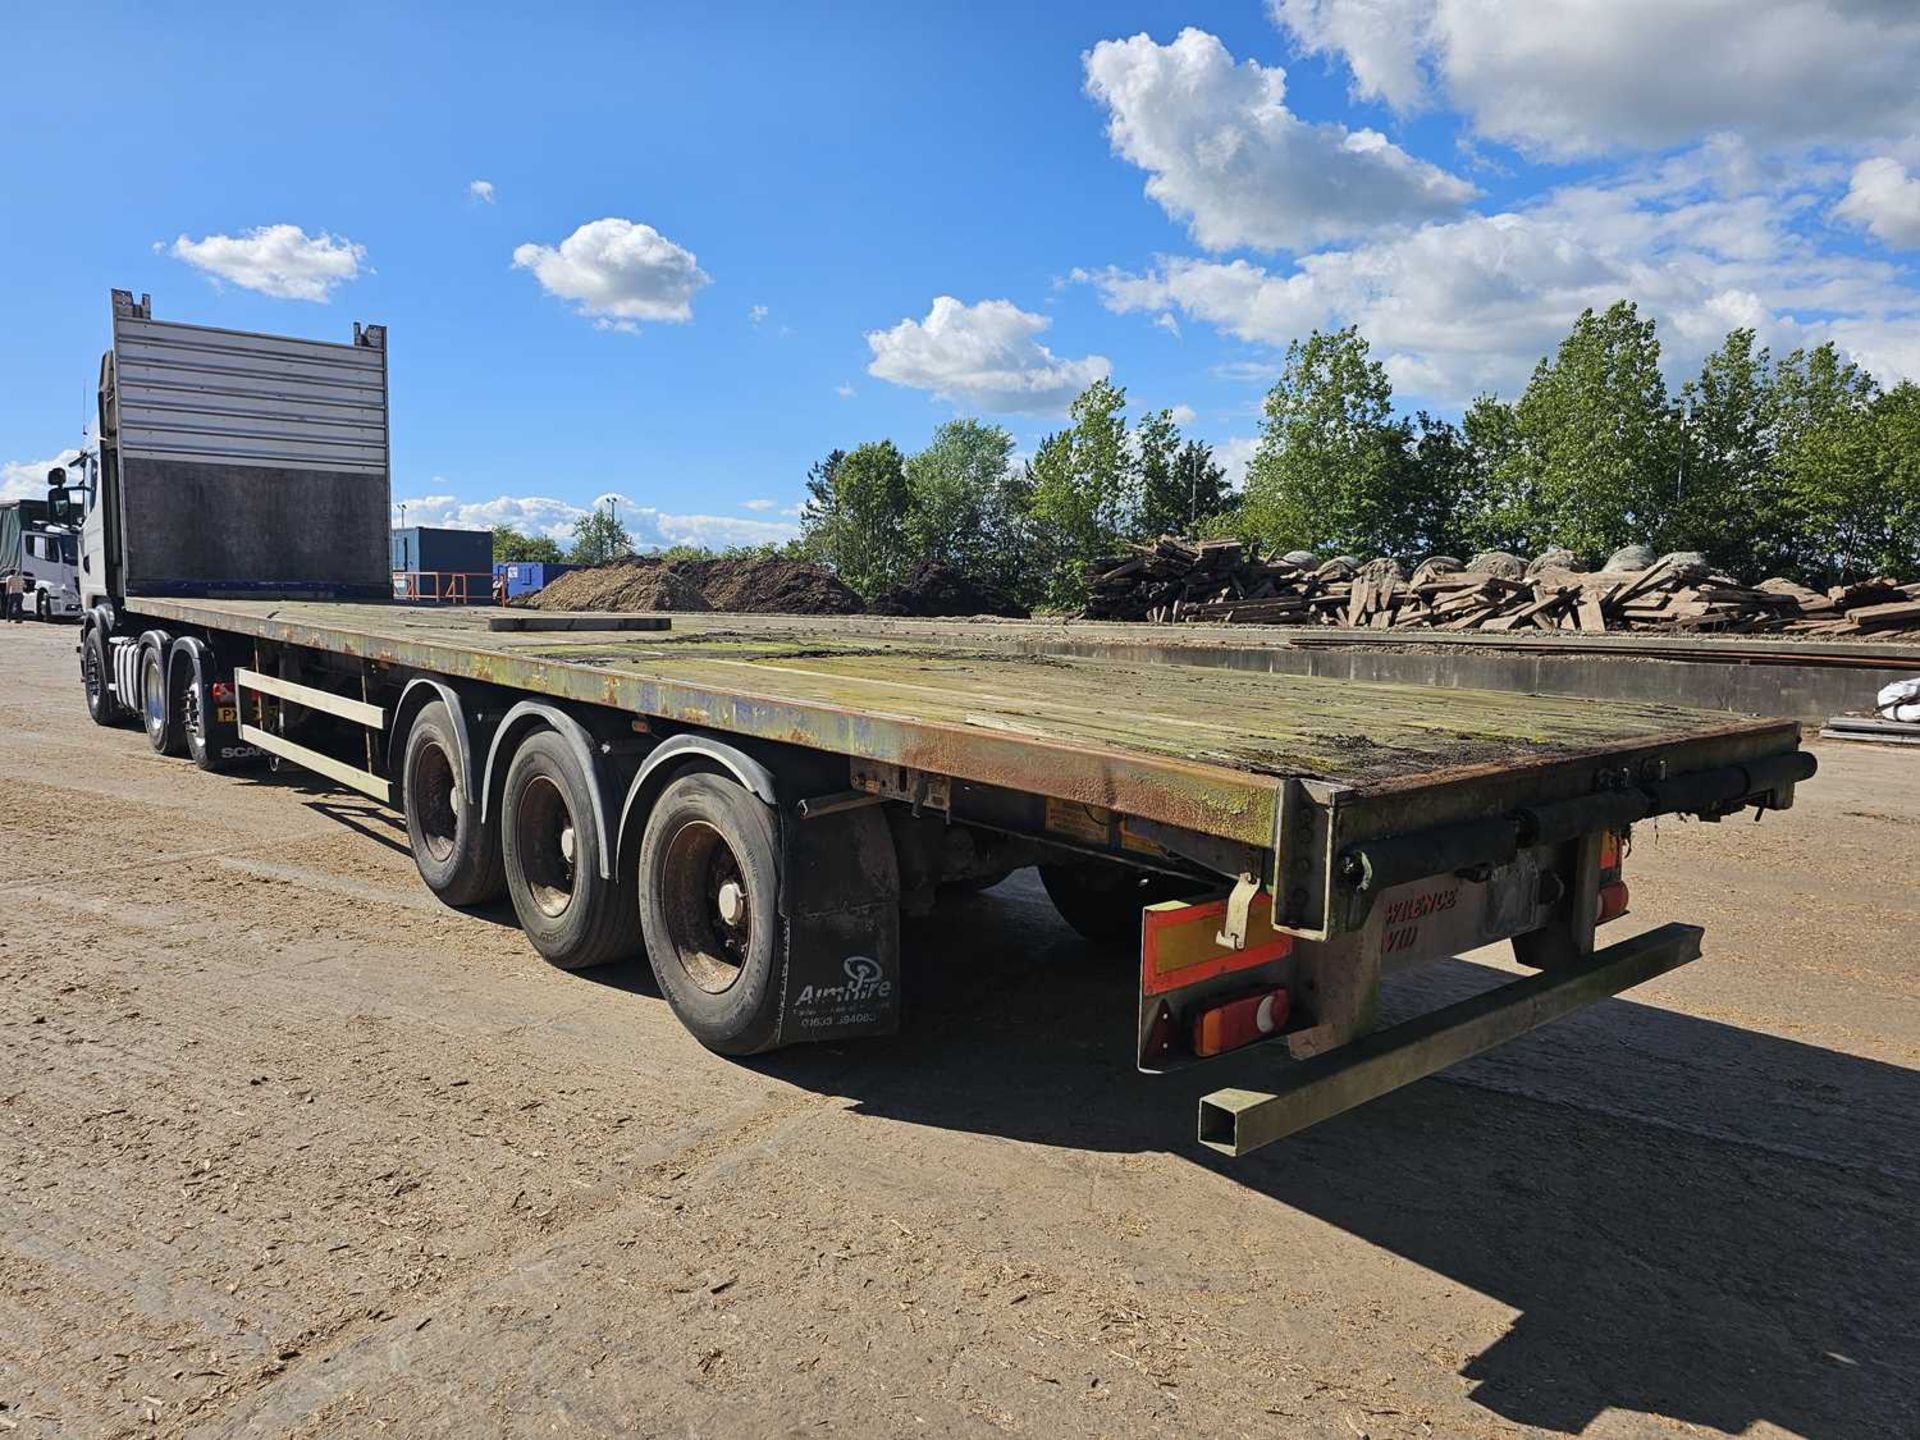 2004 Lawrence David Tri Axle Flatbed Trailer - Image 2 of 11